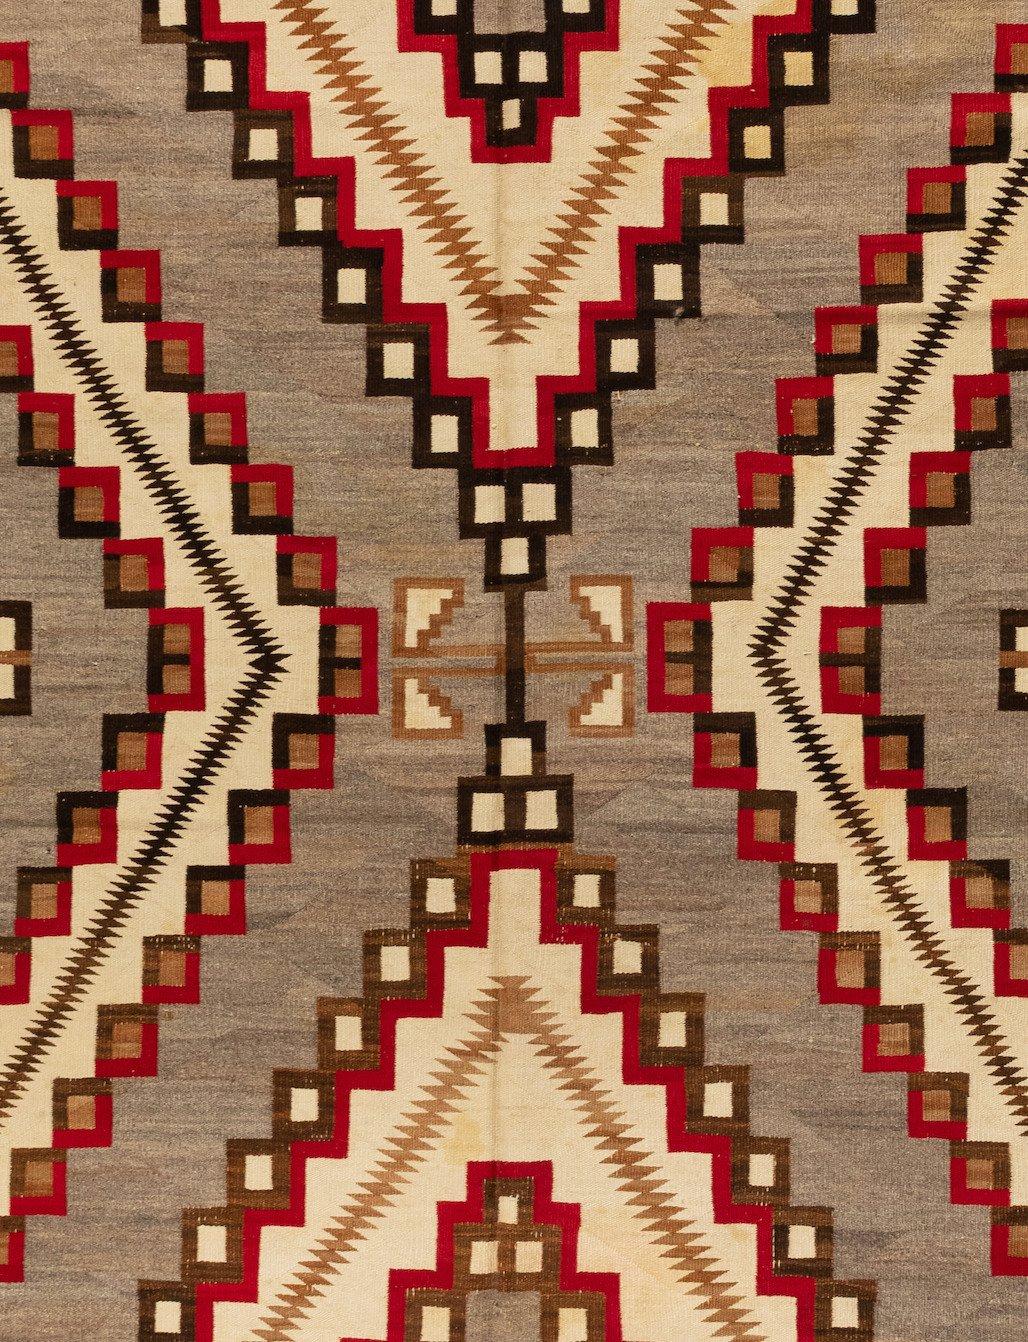 This a large, and therefore rare, antique native American Navajo Geometric rug, circa 1920-1930s in grey and ivory and measures 6.8 x 10.2 ft.

From the inception of weaving by the Navajos, circa 1700, weaving has provided an important economic